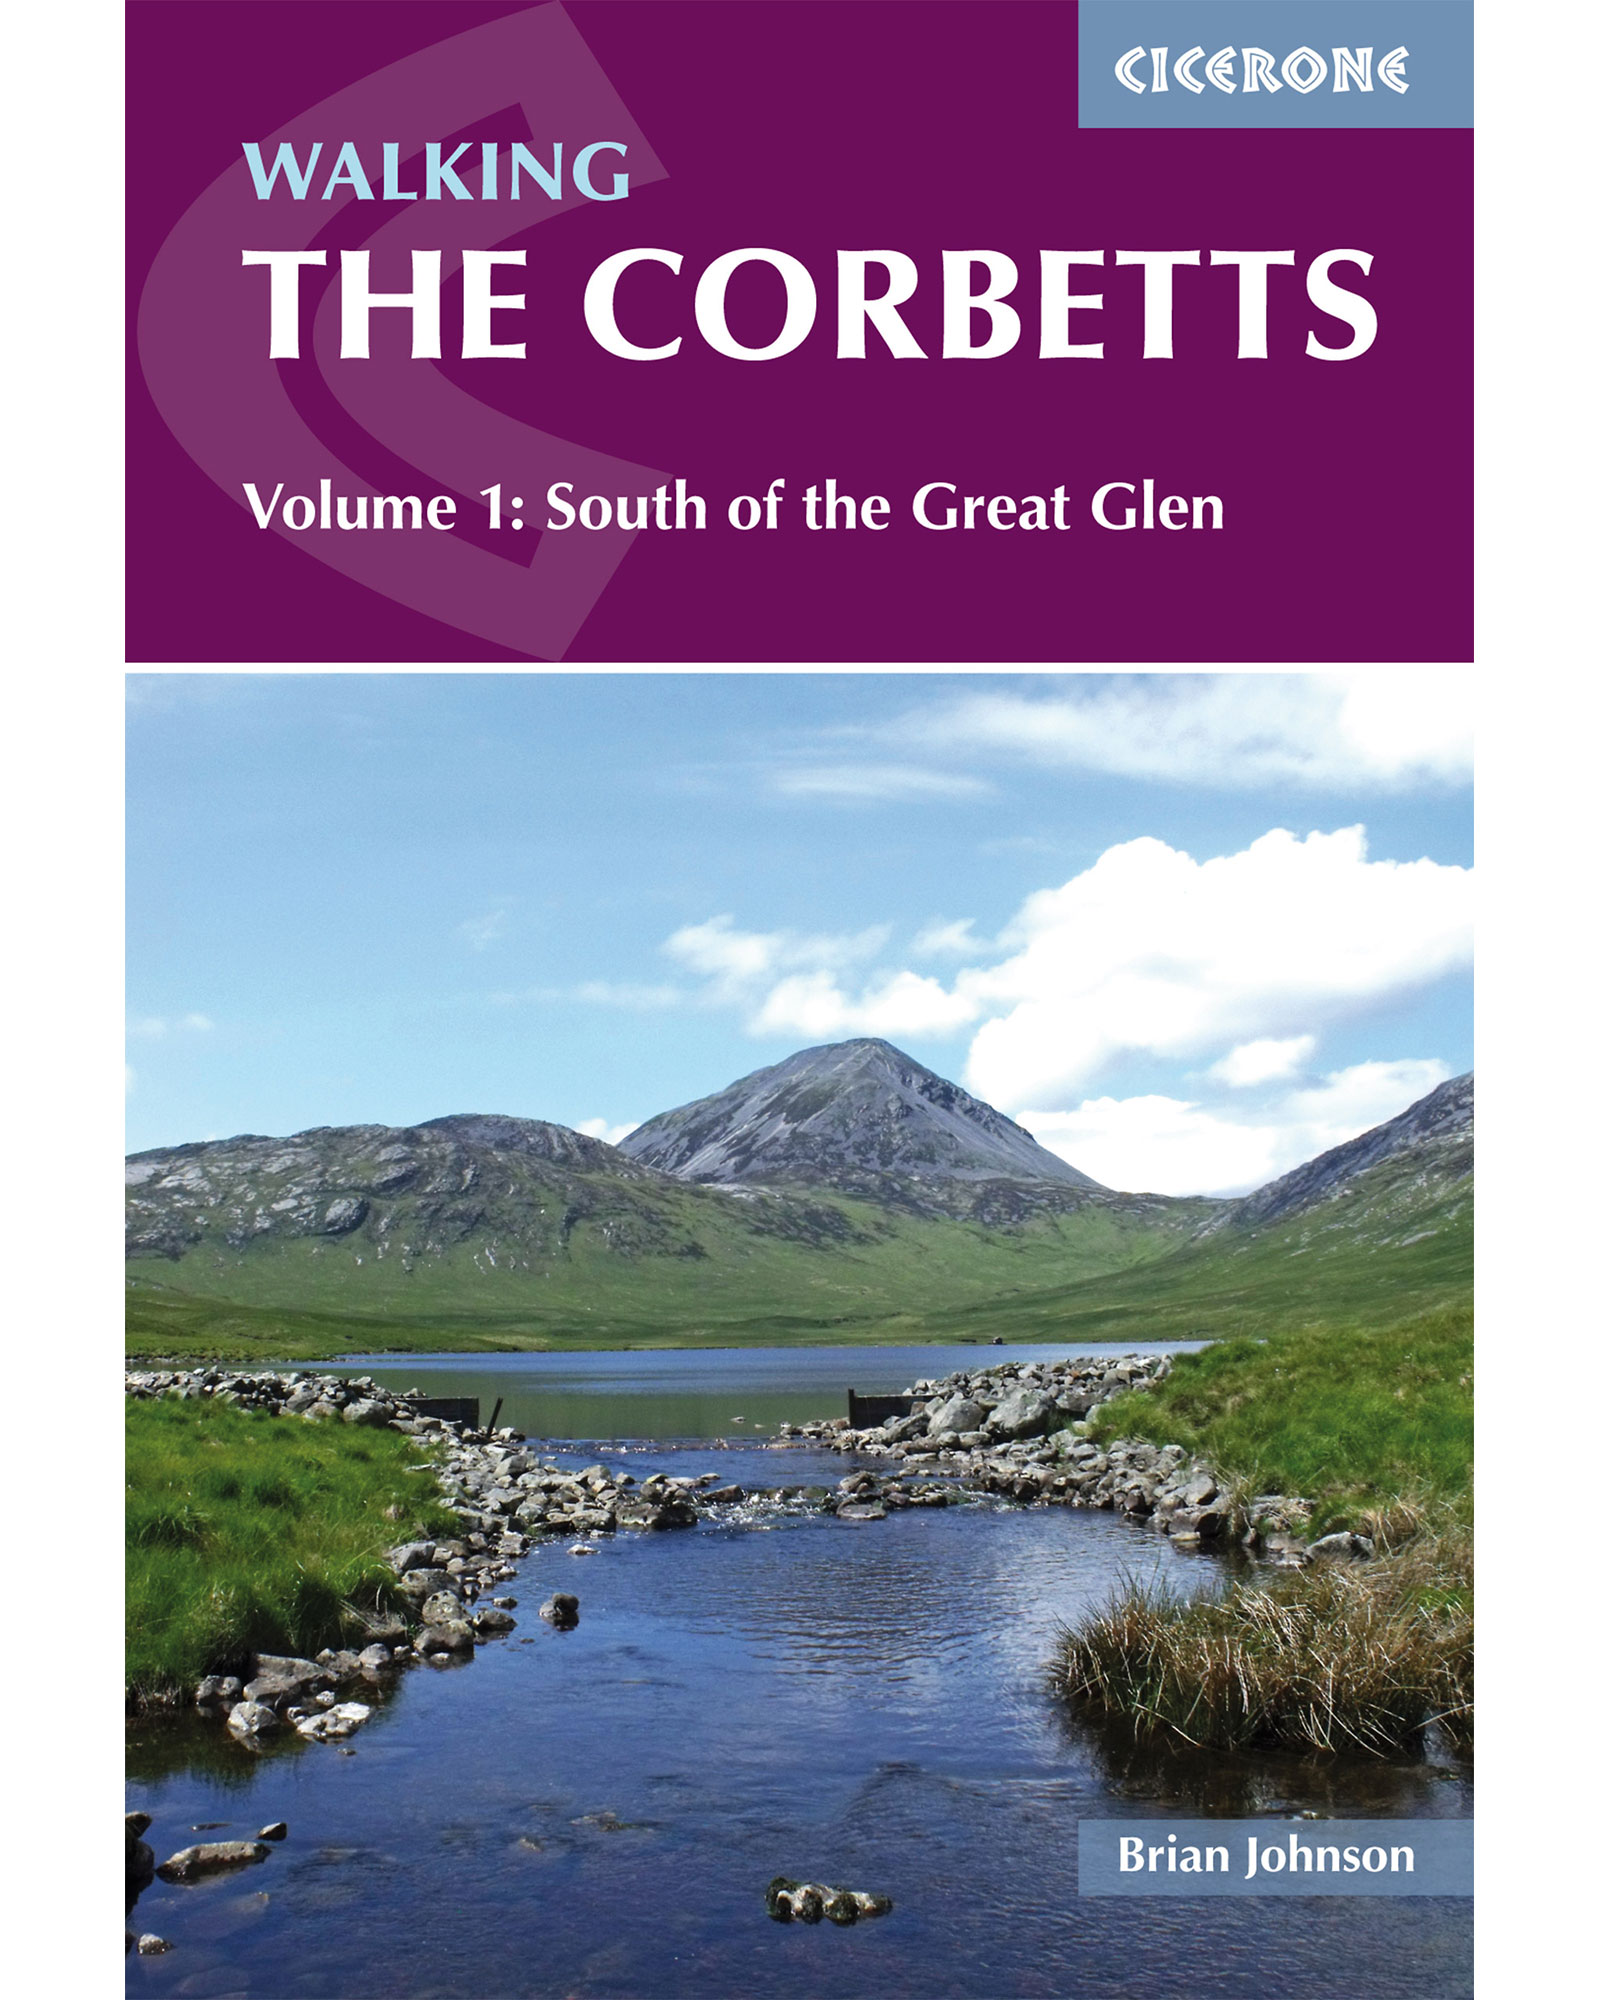 Cicerone Walking in the Corbetts: Volume 1 Guide Book